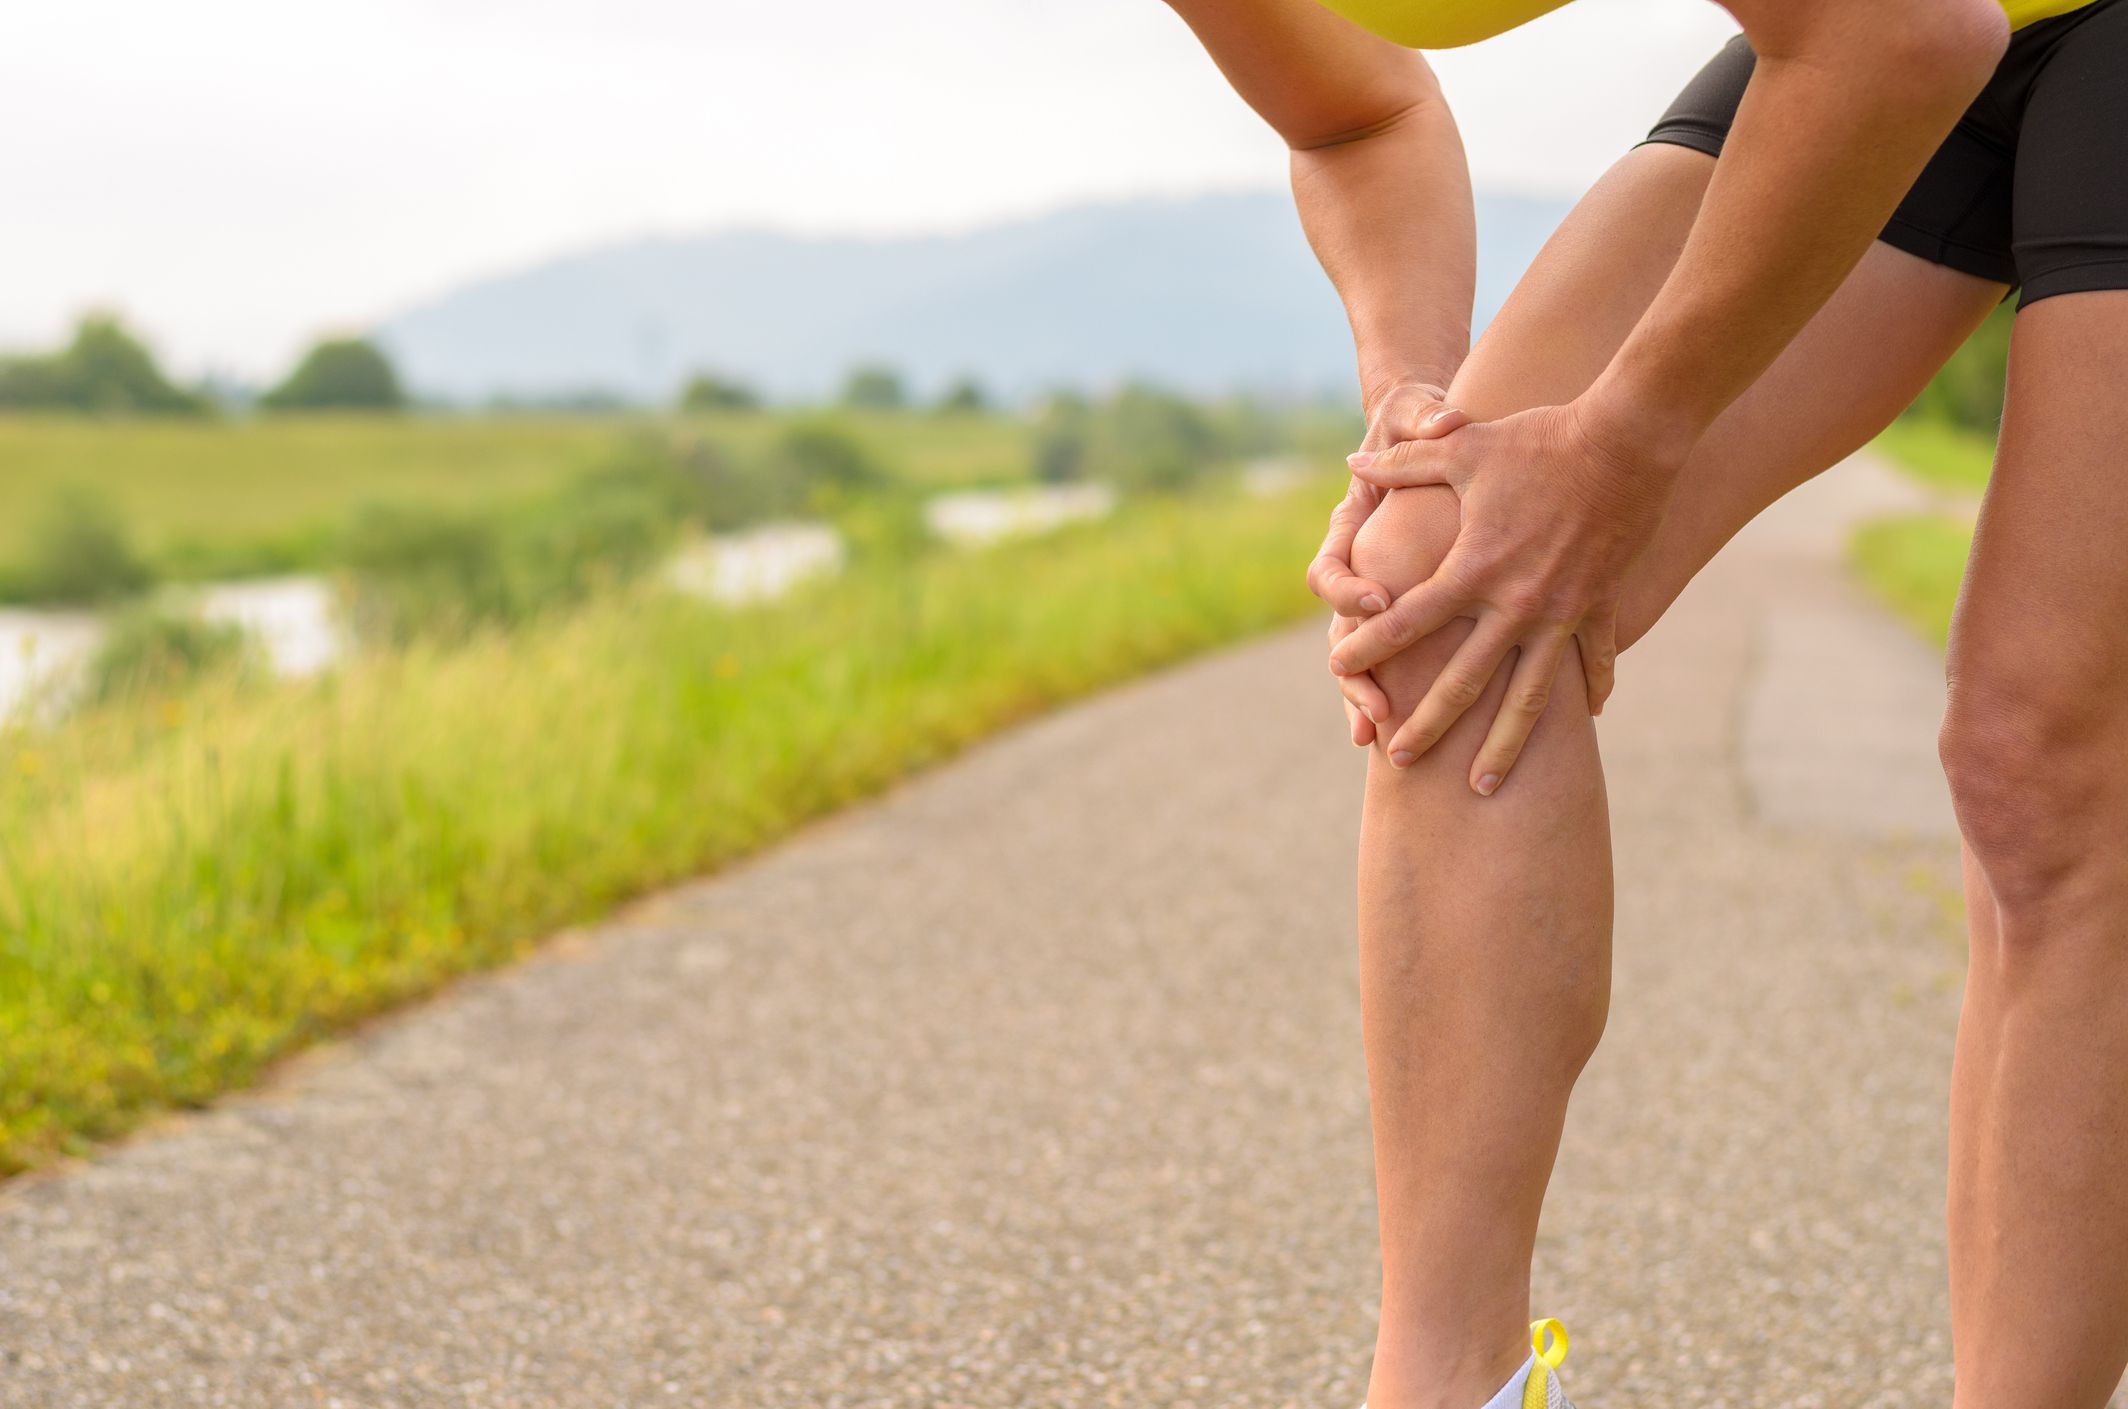 Knee Pain From Running: Common Causes and Treatments